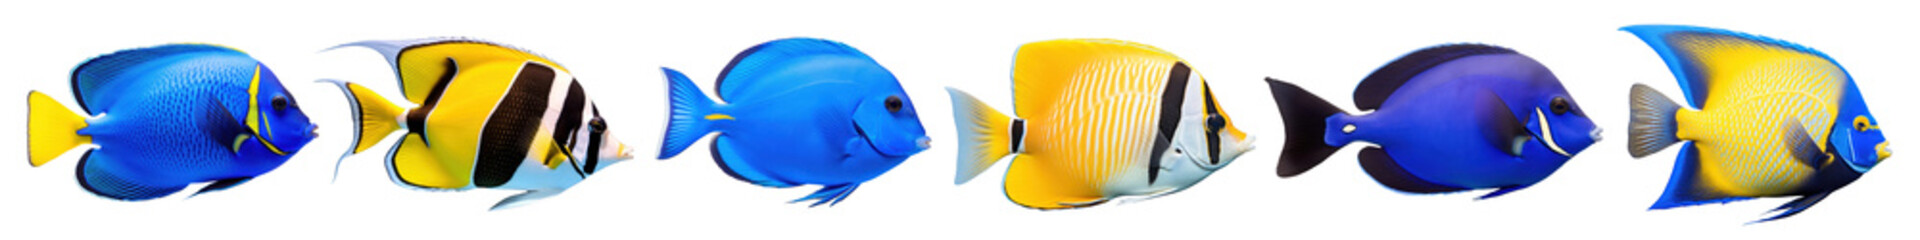 Fish animal png cut out element set